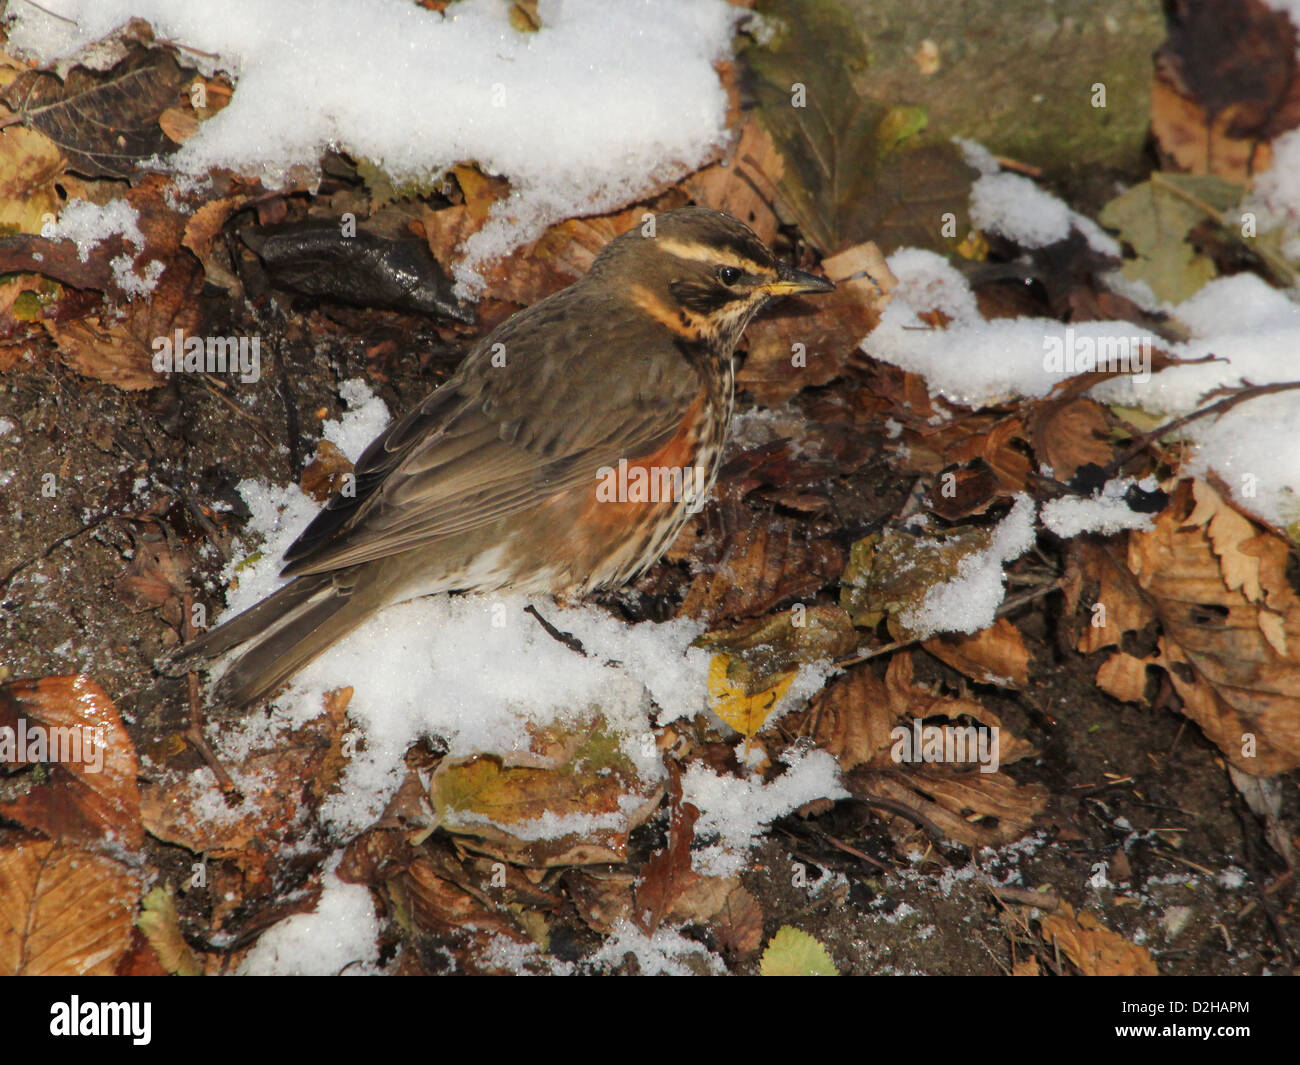 Detailed close-up of a Redwing (Turdus iliacus) foraging in the snow Stock Photo